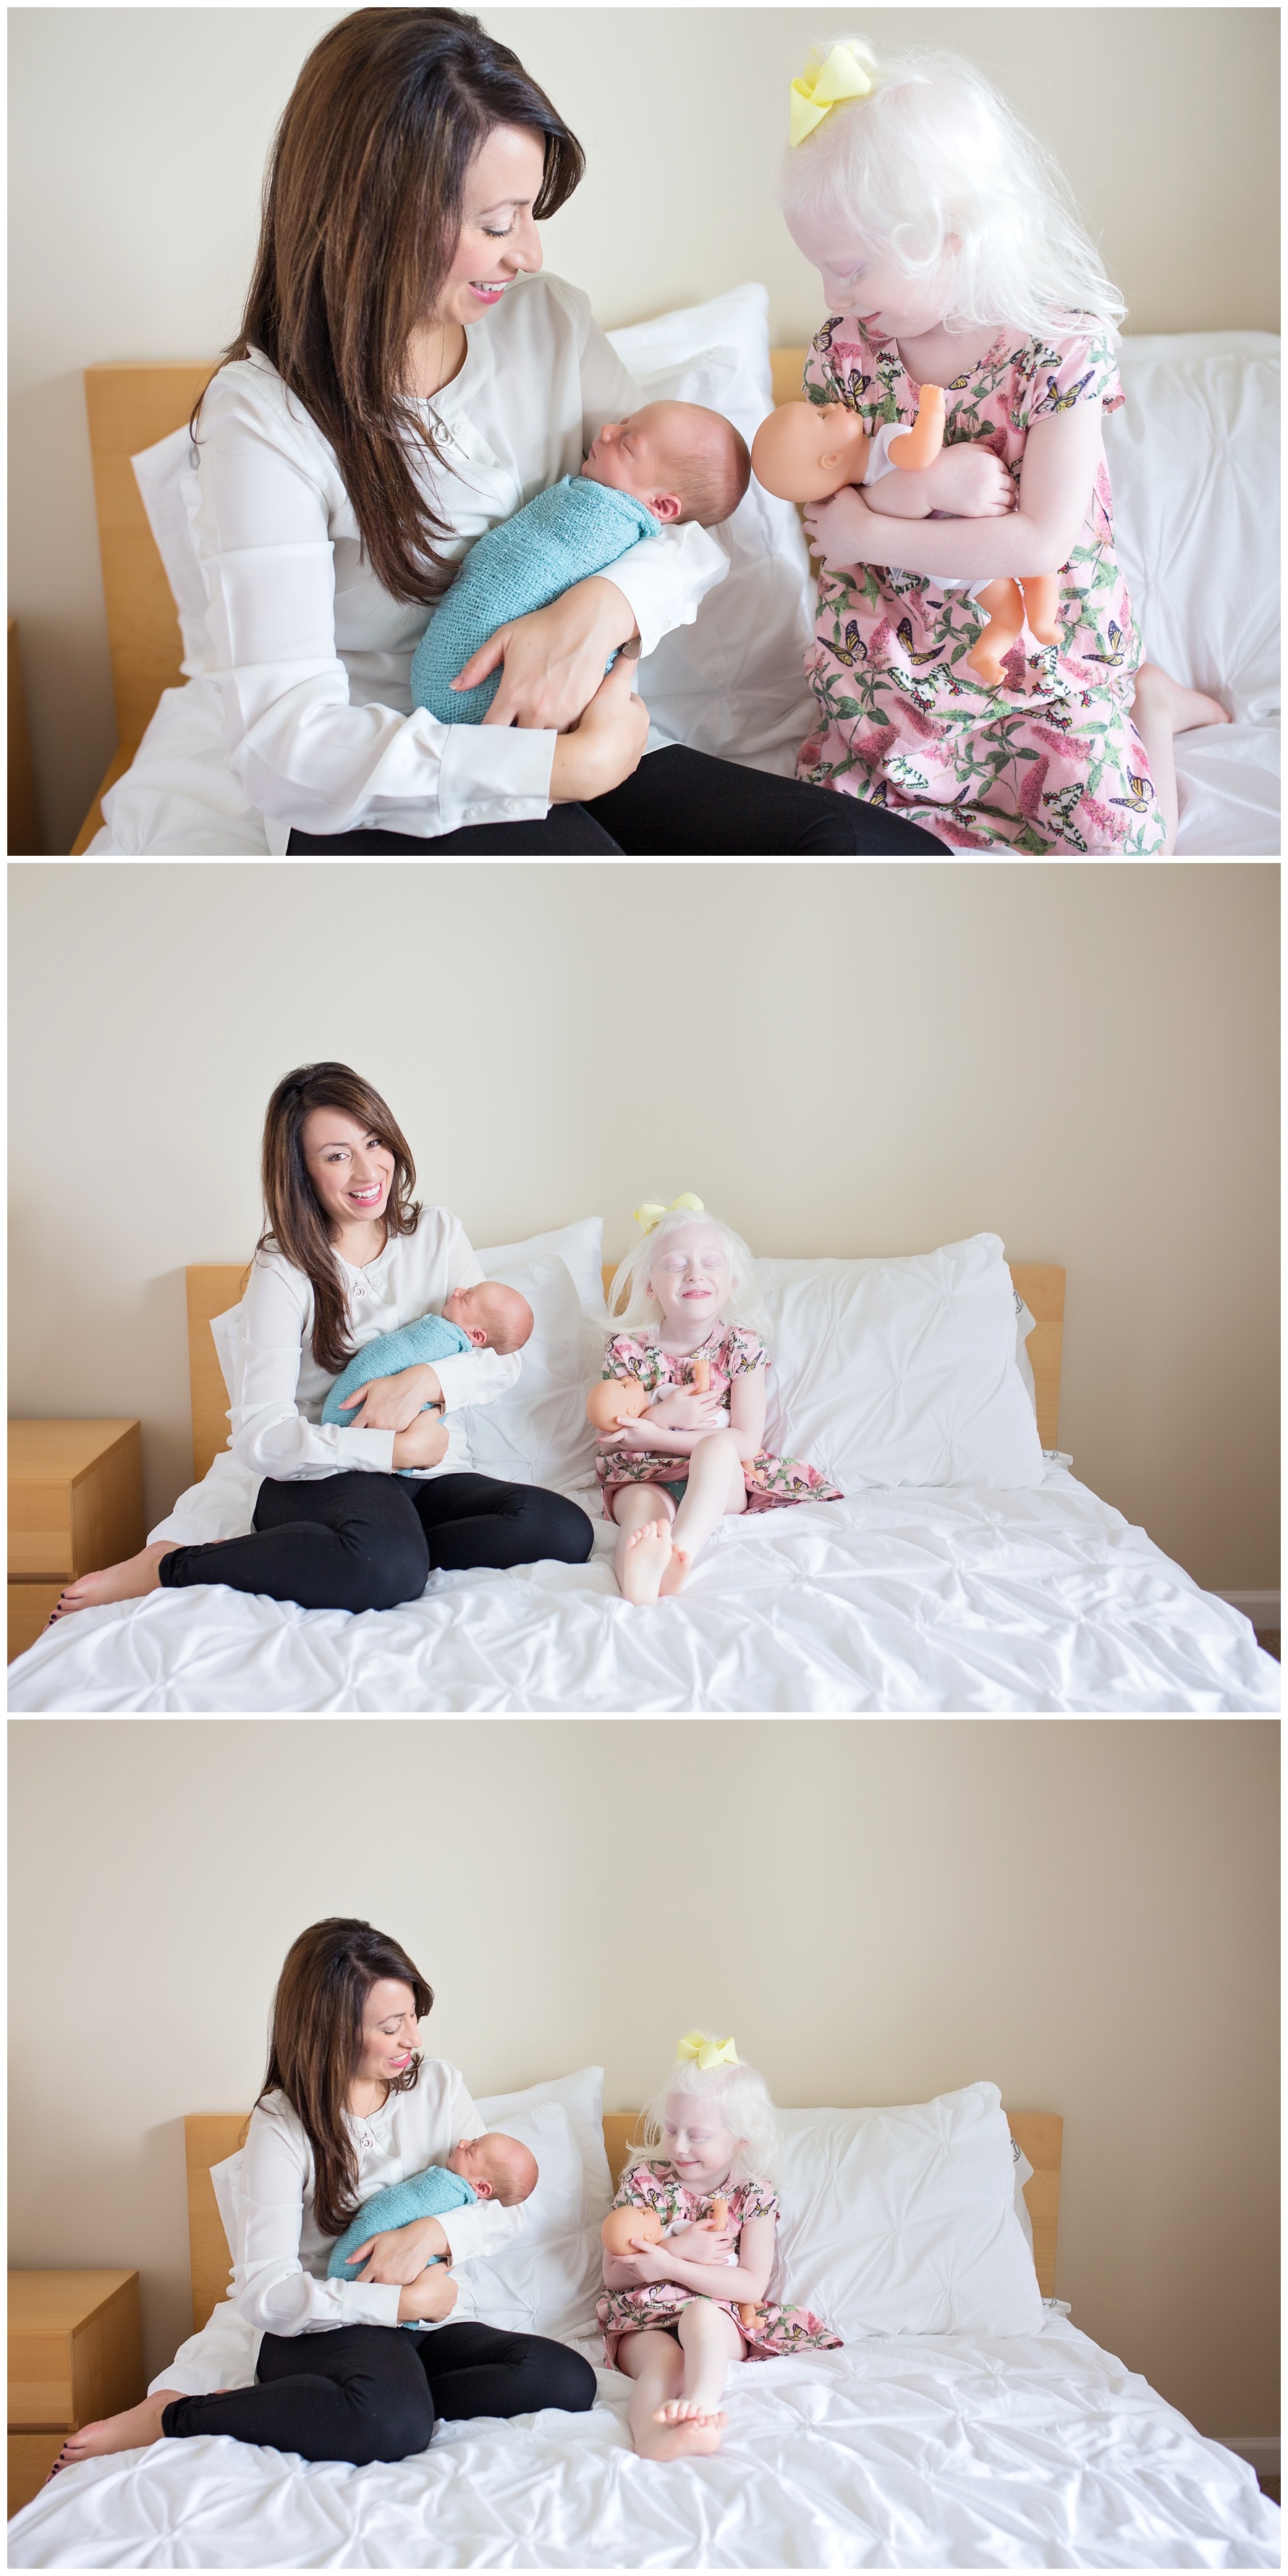 newborn baby with sibling poses